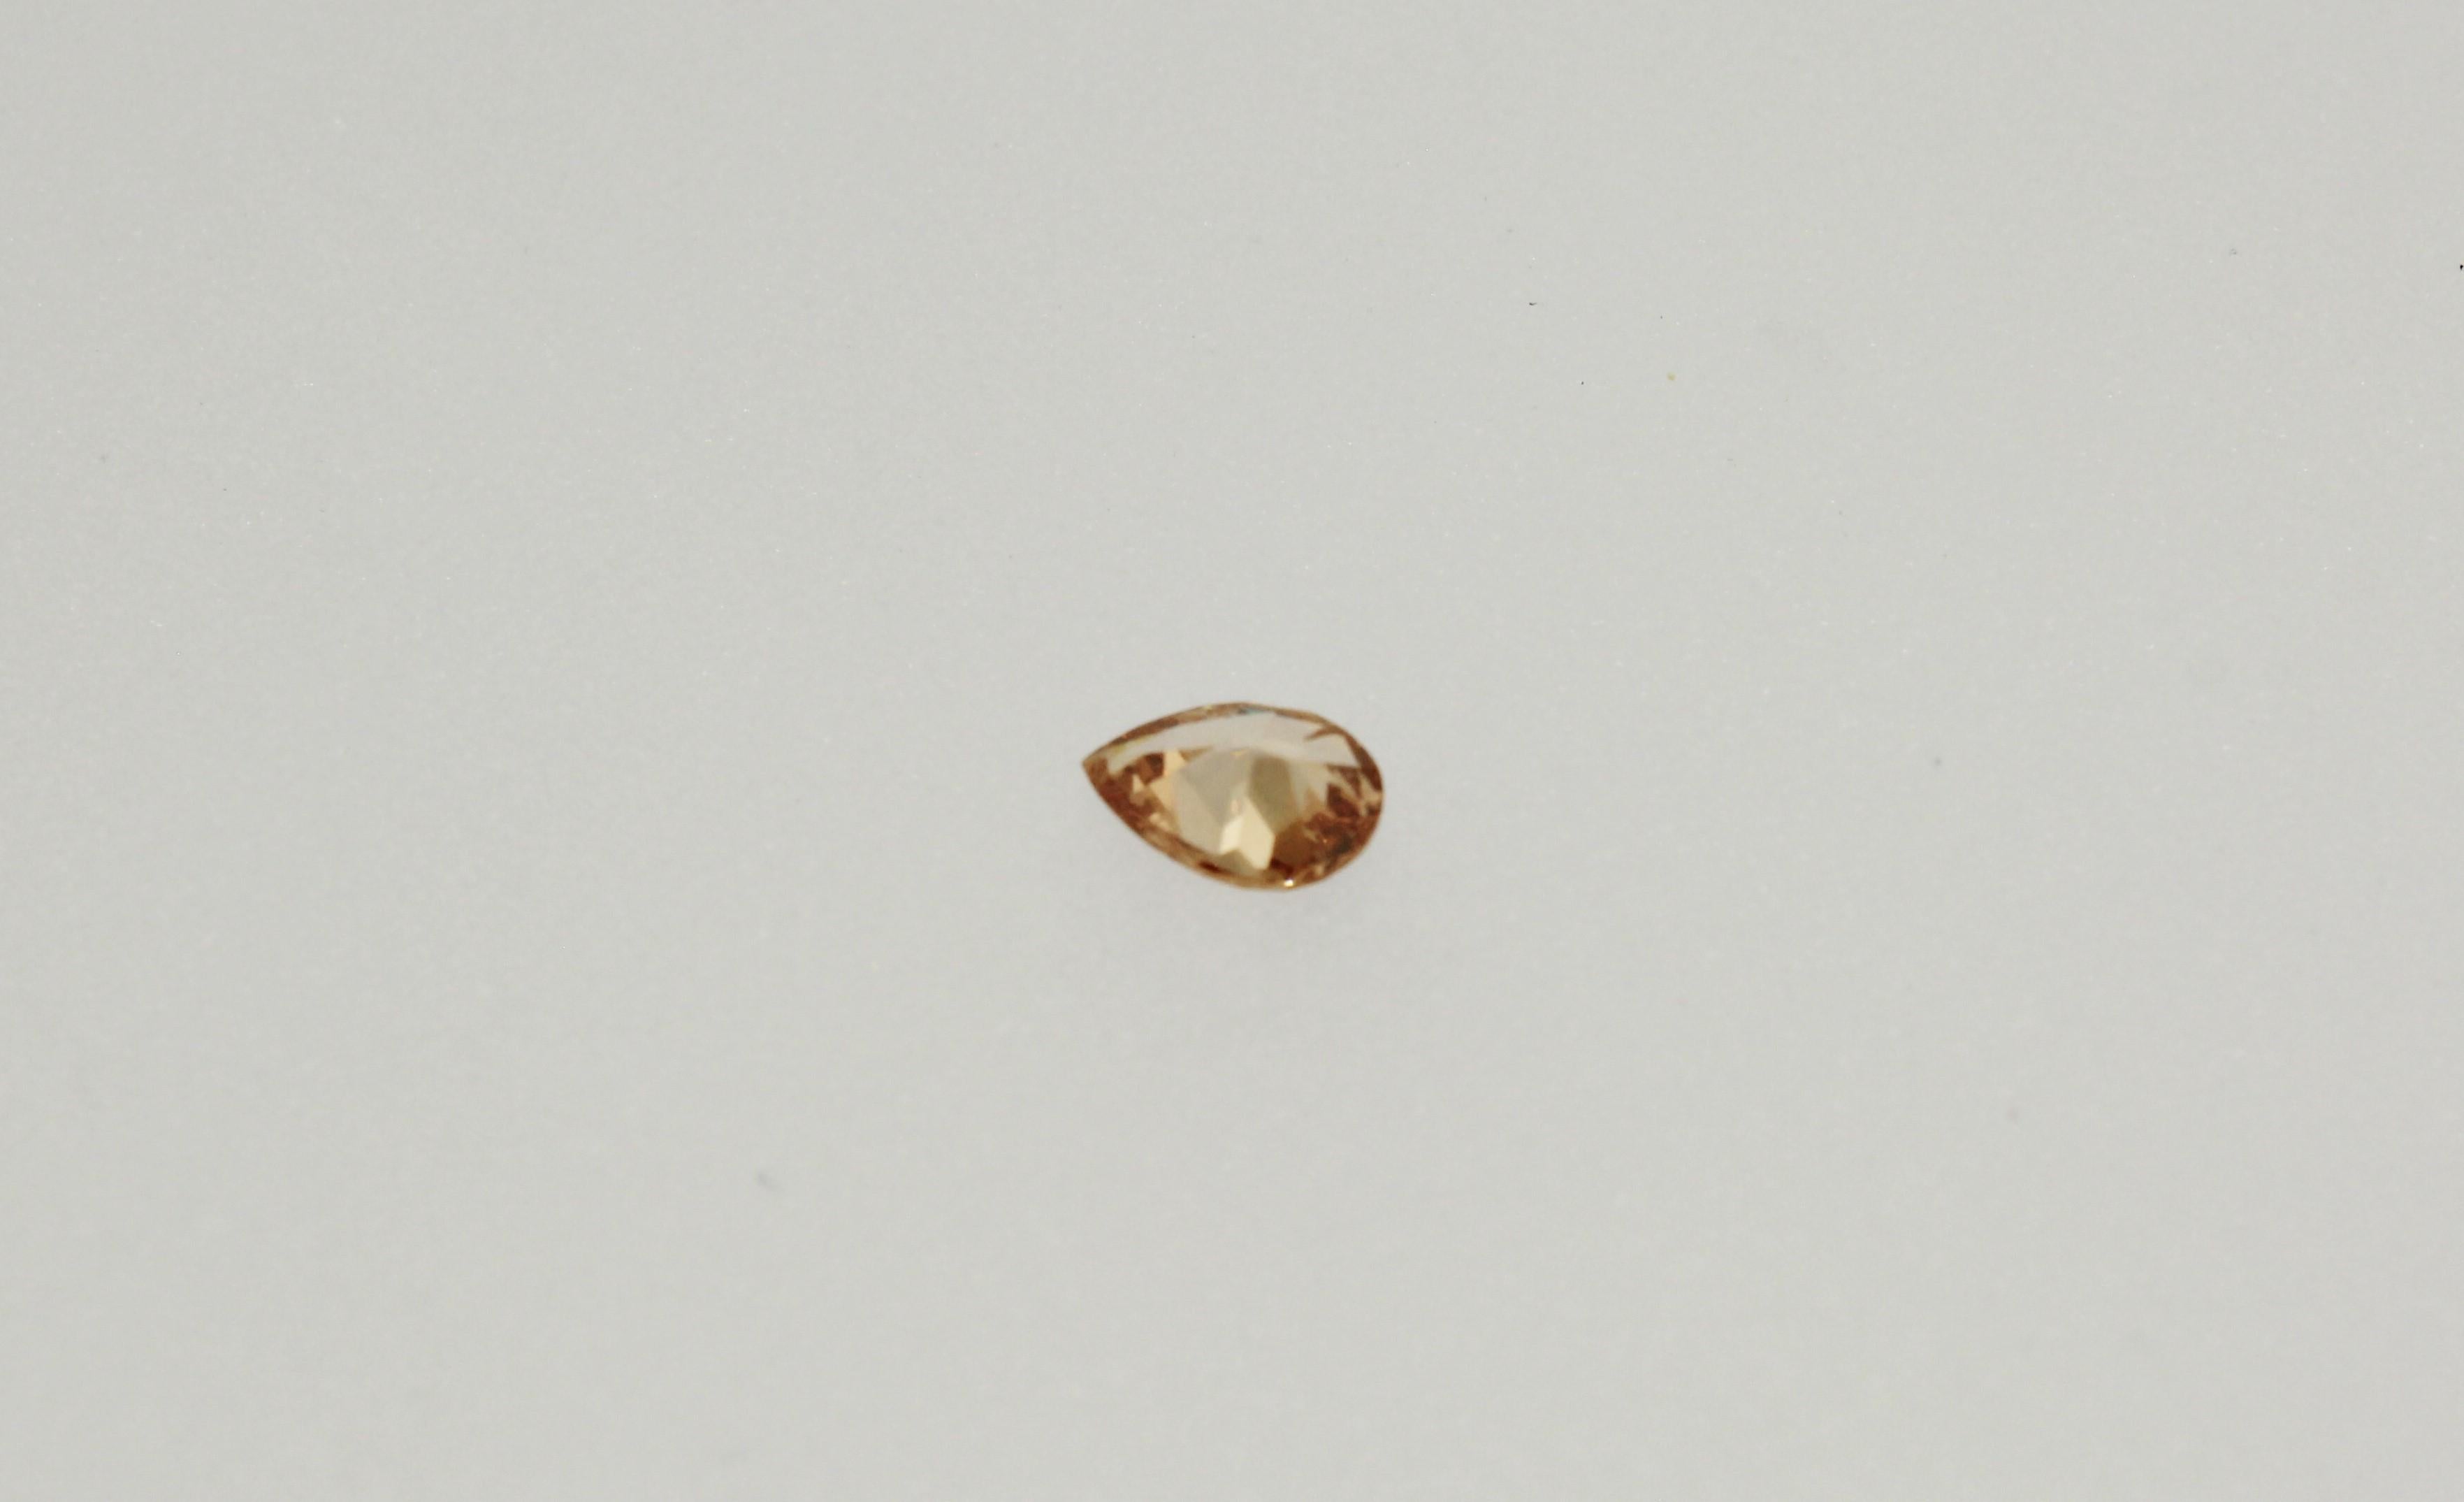 .24 Carat Natural Fancy Deep Brownish Yellowish Orange Pear Shape Diamond with GIA lab report #2141431316.  This diamond has a beautiful tone in its color and will make a great center stone or accent diamond for a larger center stone.  The I1